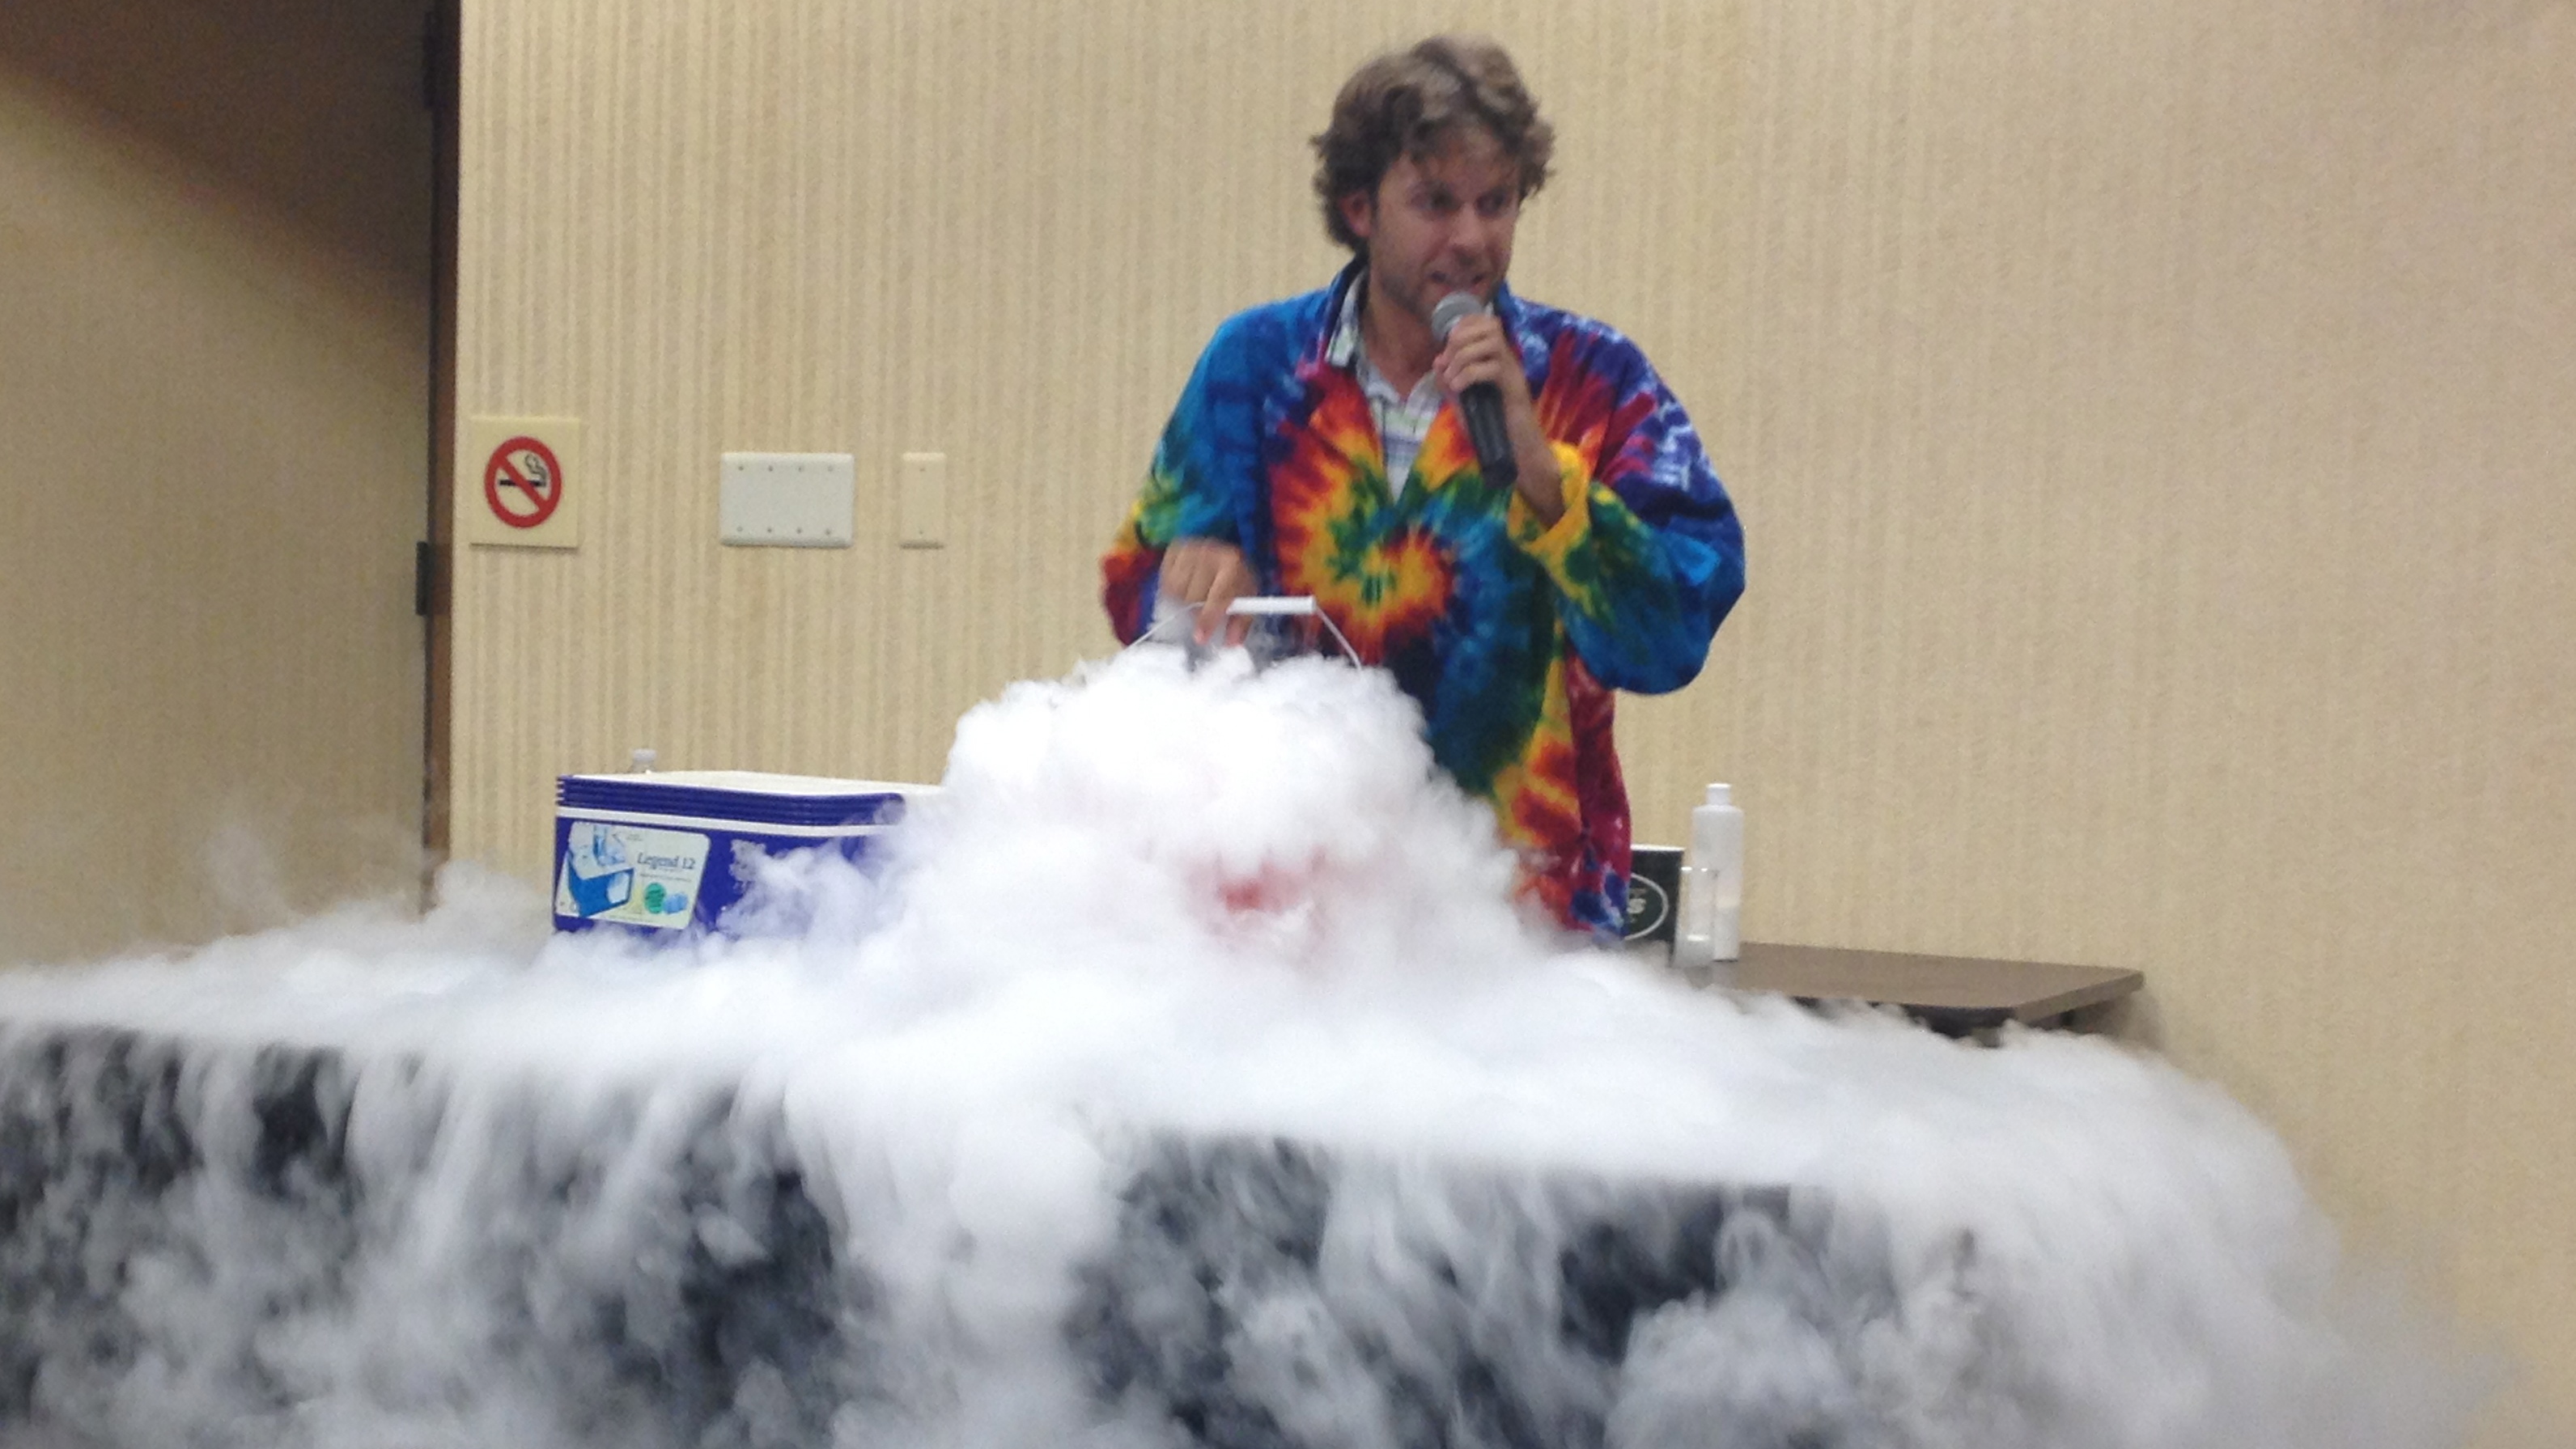 We enjoyed an exciting summer reading kick-off with Sciencetellers!